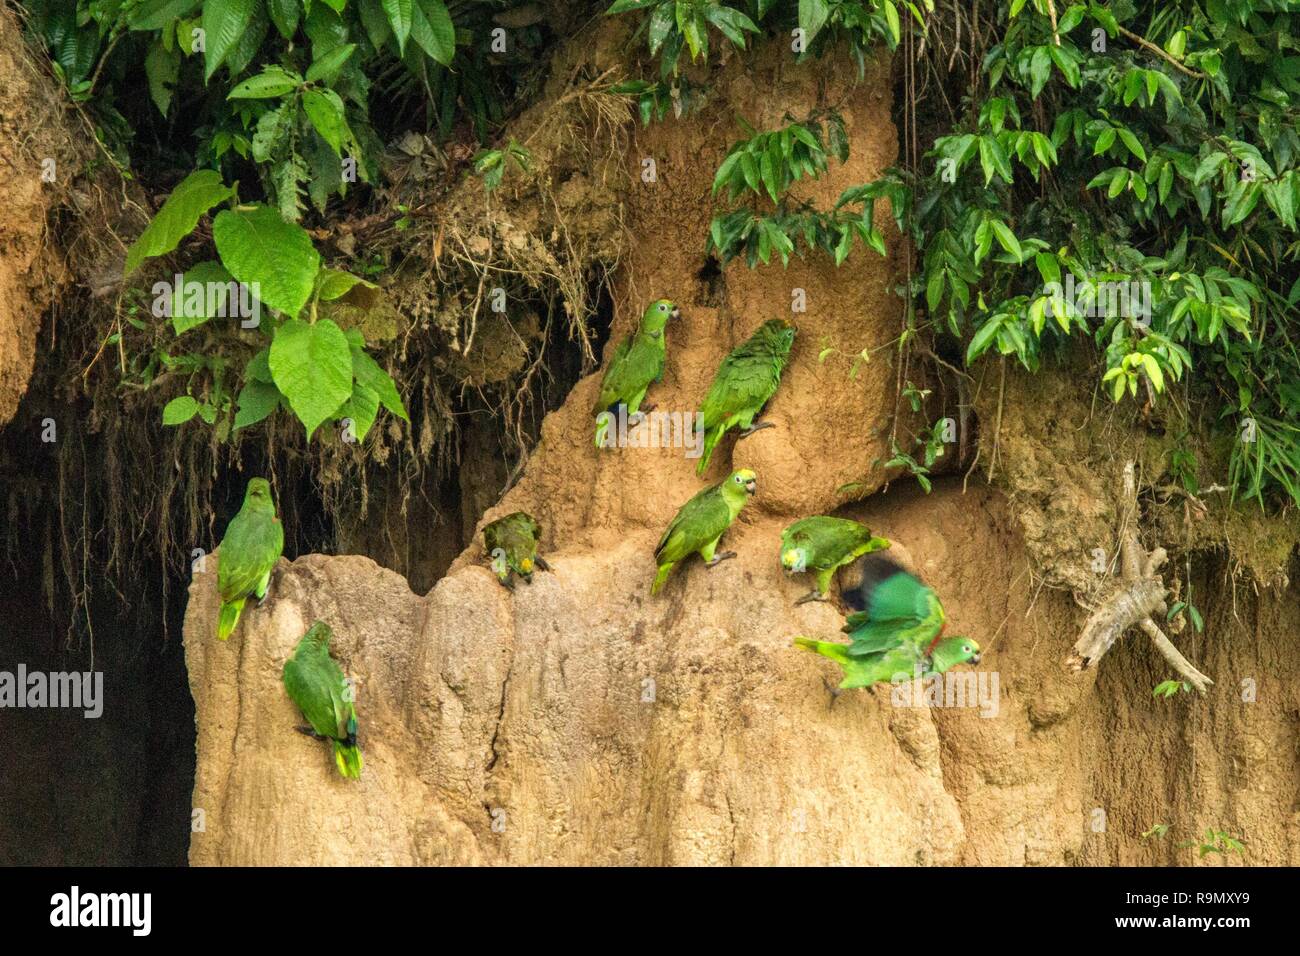 Green parrots on clay lick eating minerals, Green amazons in tropical forest, Brazil, Wildlife scene from tropical nature. Flock of birds on clay brow Stock Photo